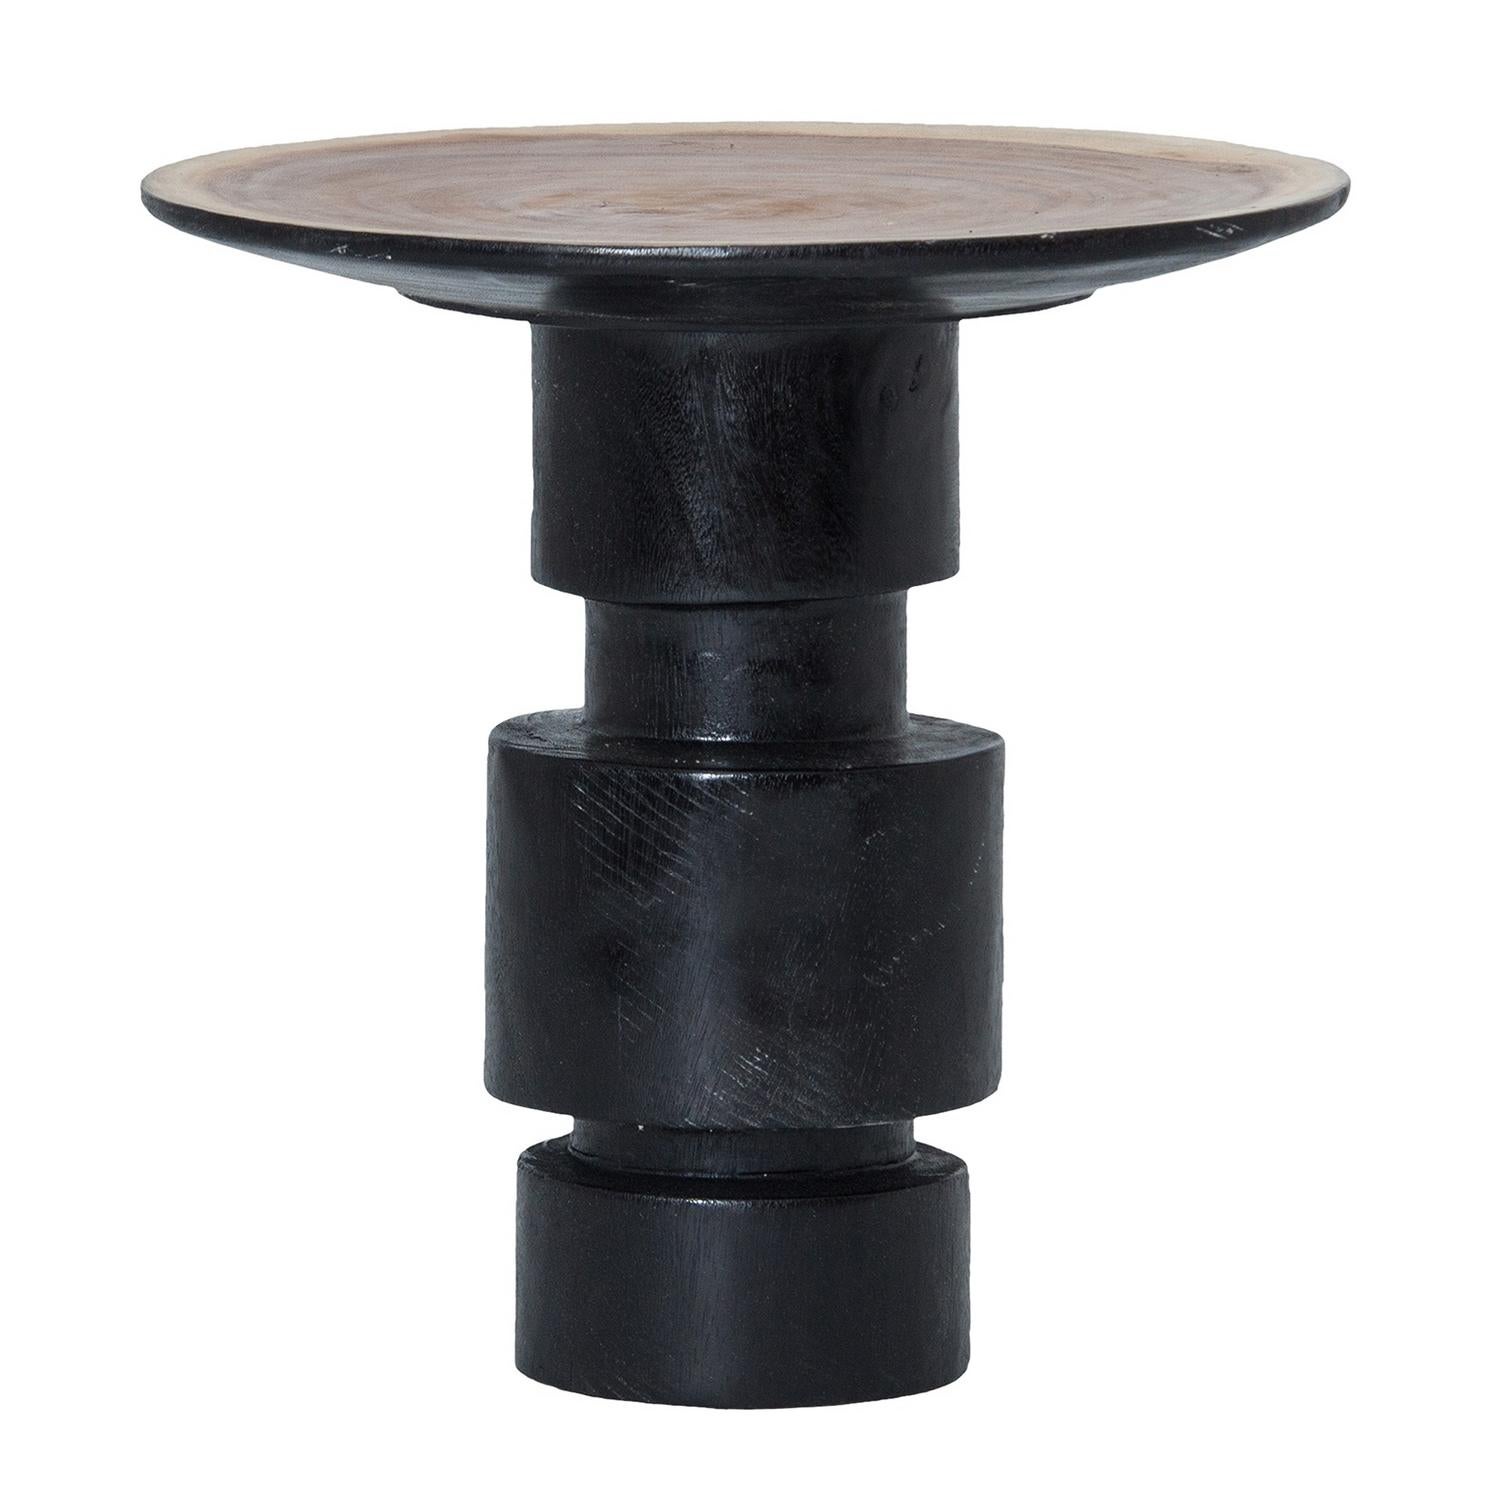 Pair of Primitive design and Brutalist style ebonized solid wood side tables.